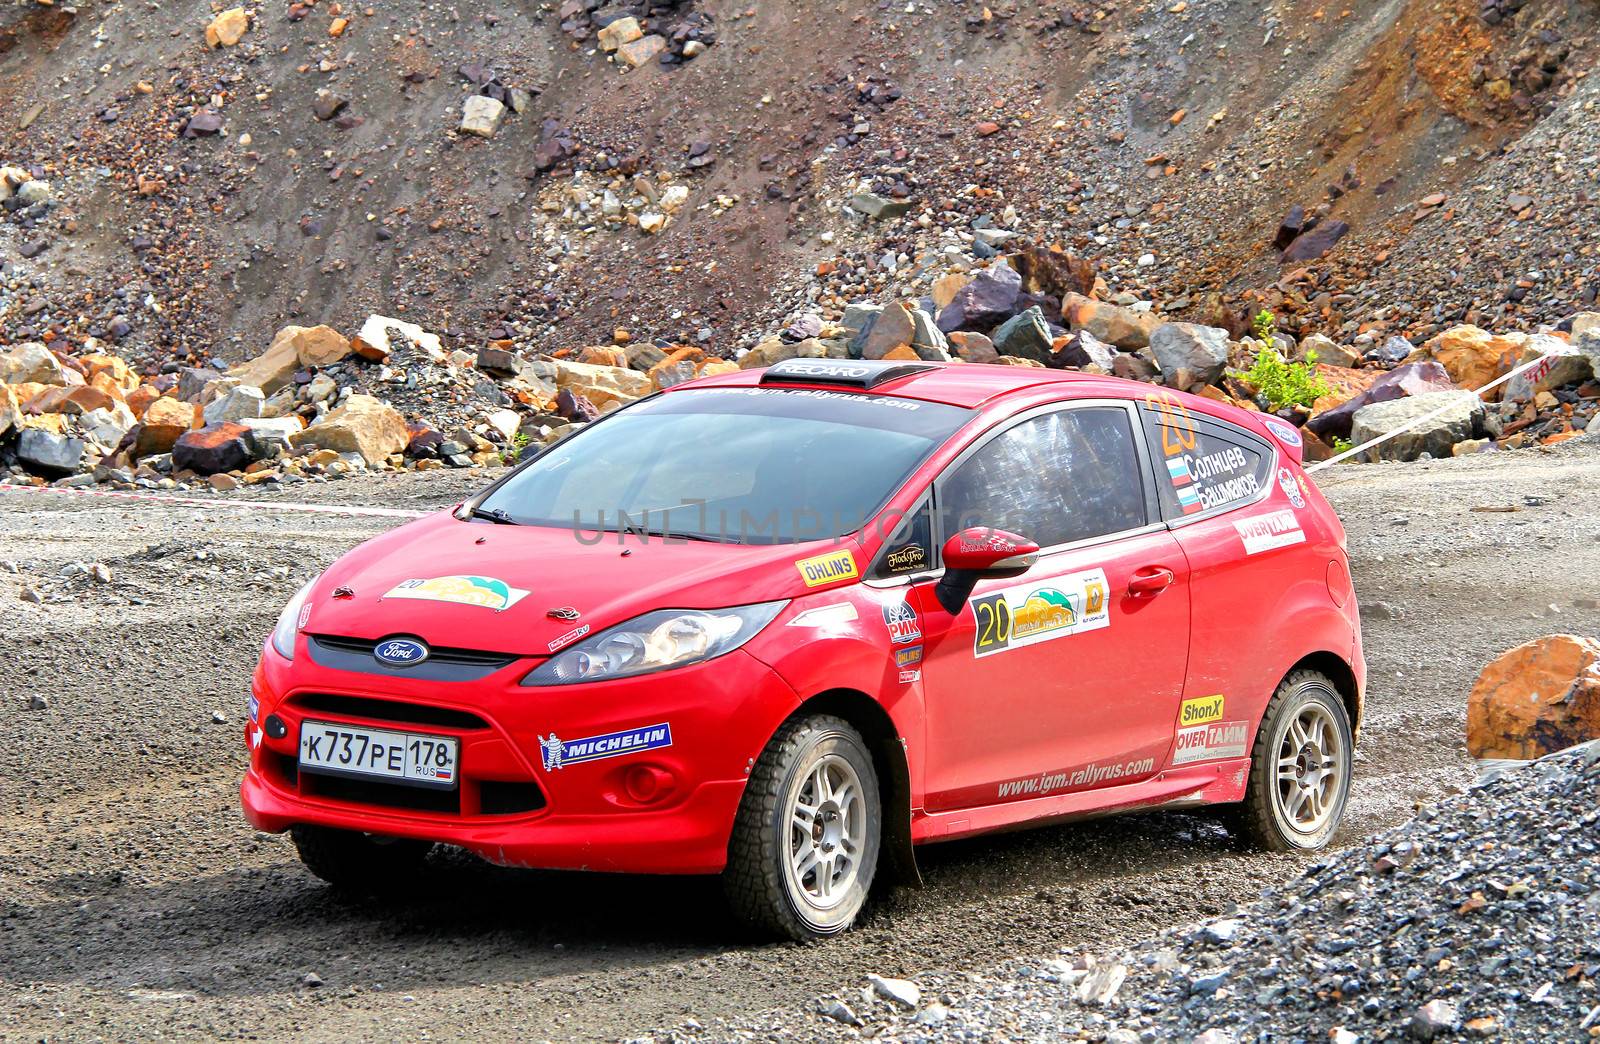 BAKAL, RUSSIA - JULY 21: Sergey Solntsev's Ford Fiesta (No. 20) competes at the annual Rally Southern Ural on July 21, 2012 in Bakal, Satka district, Chelyabinsk region, Russia.